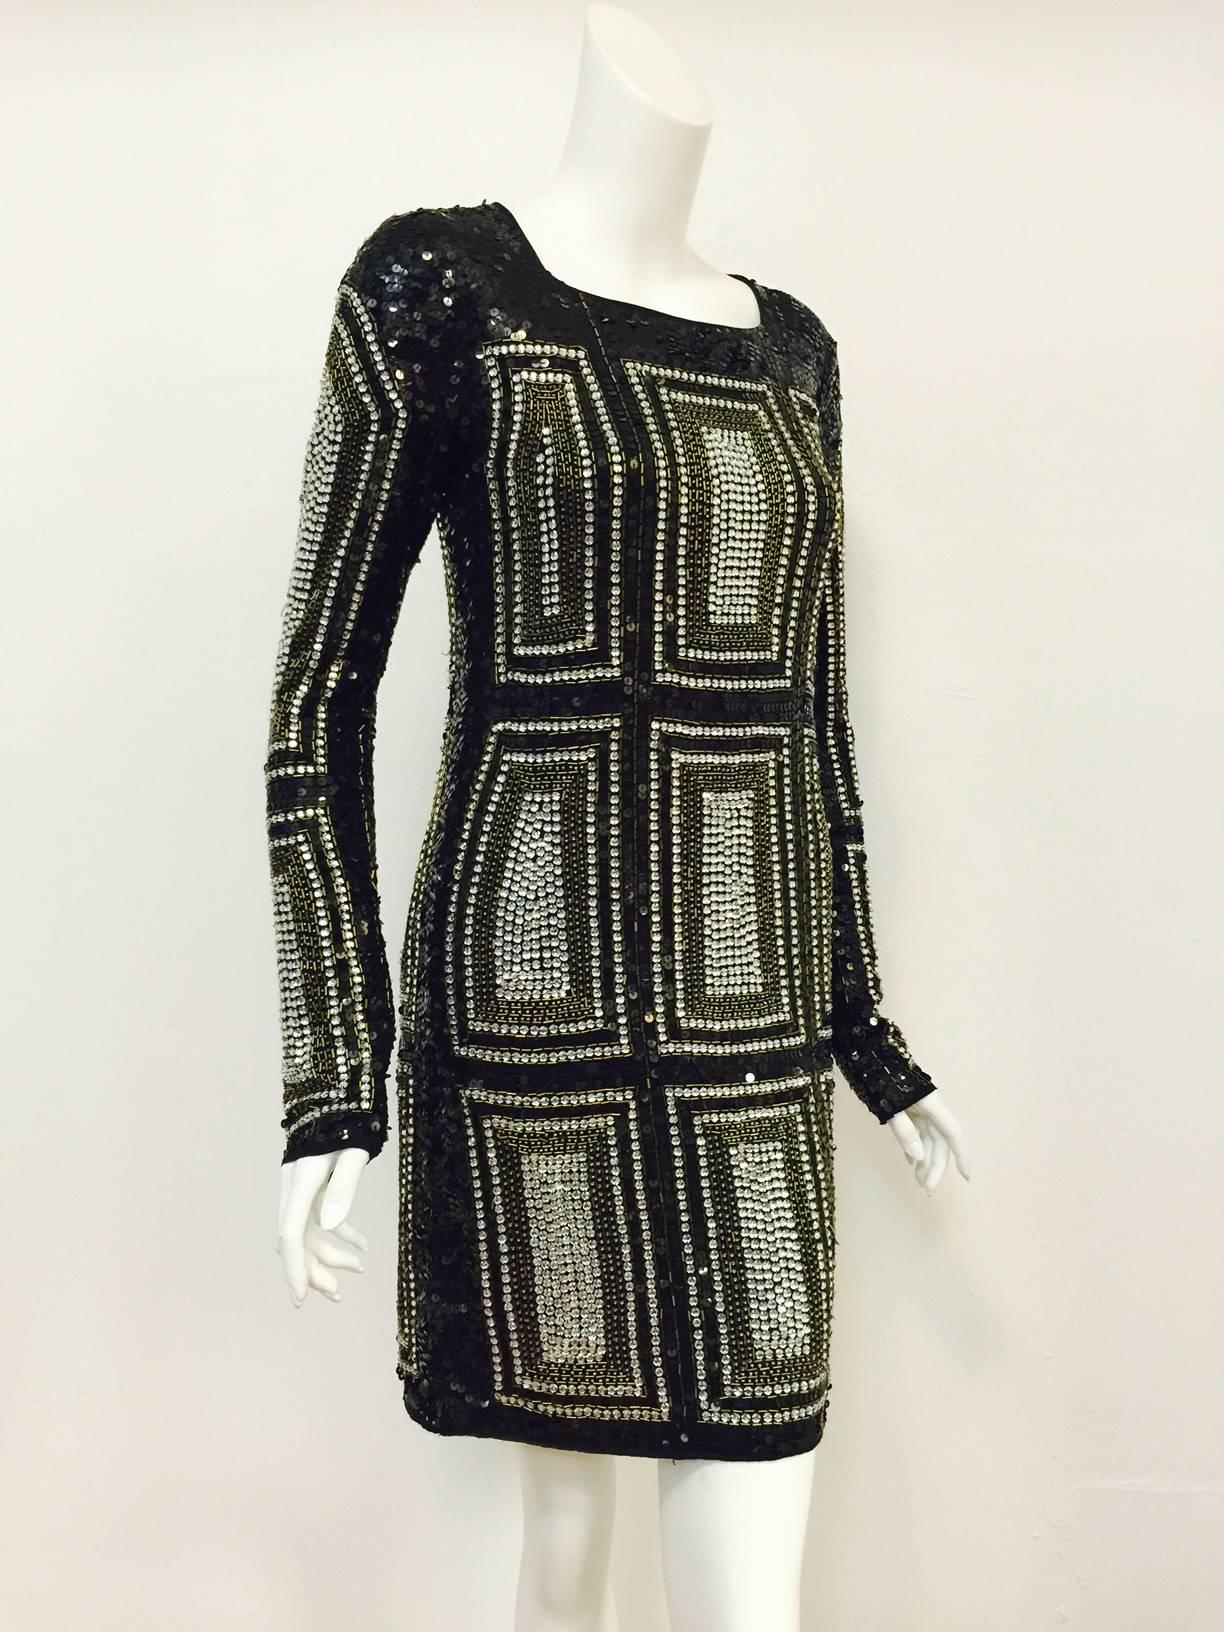 New All Love Black Long Sleeve Dress Encrusted with Beads and Sequins  1